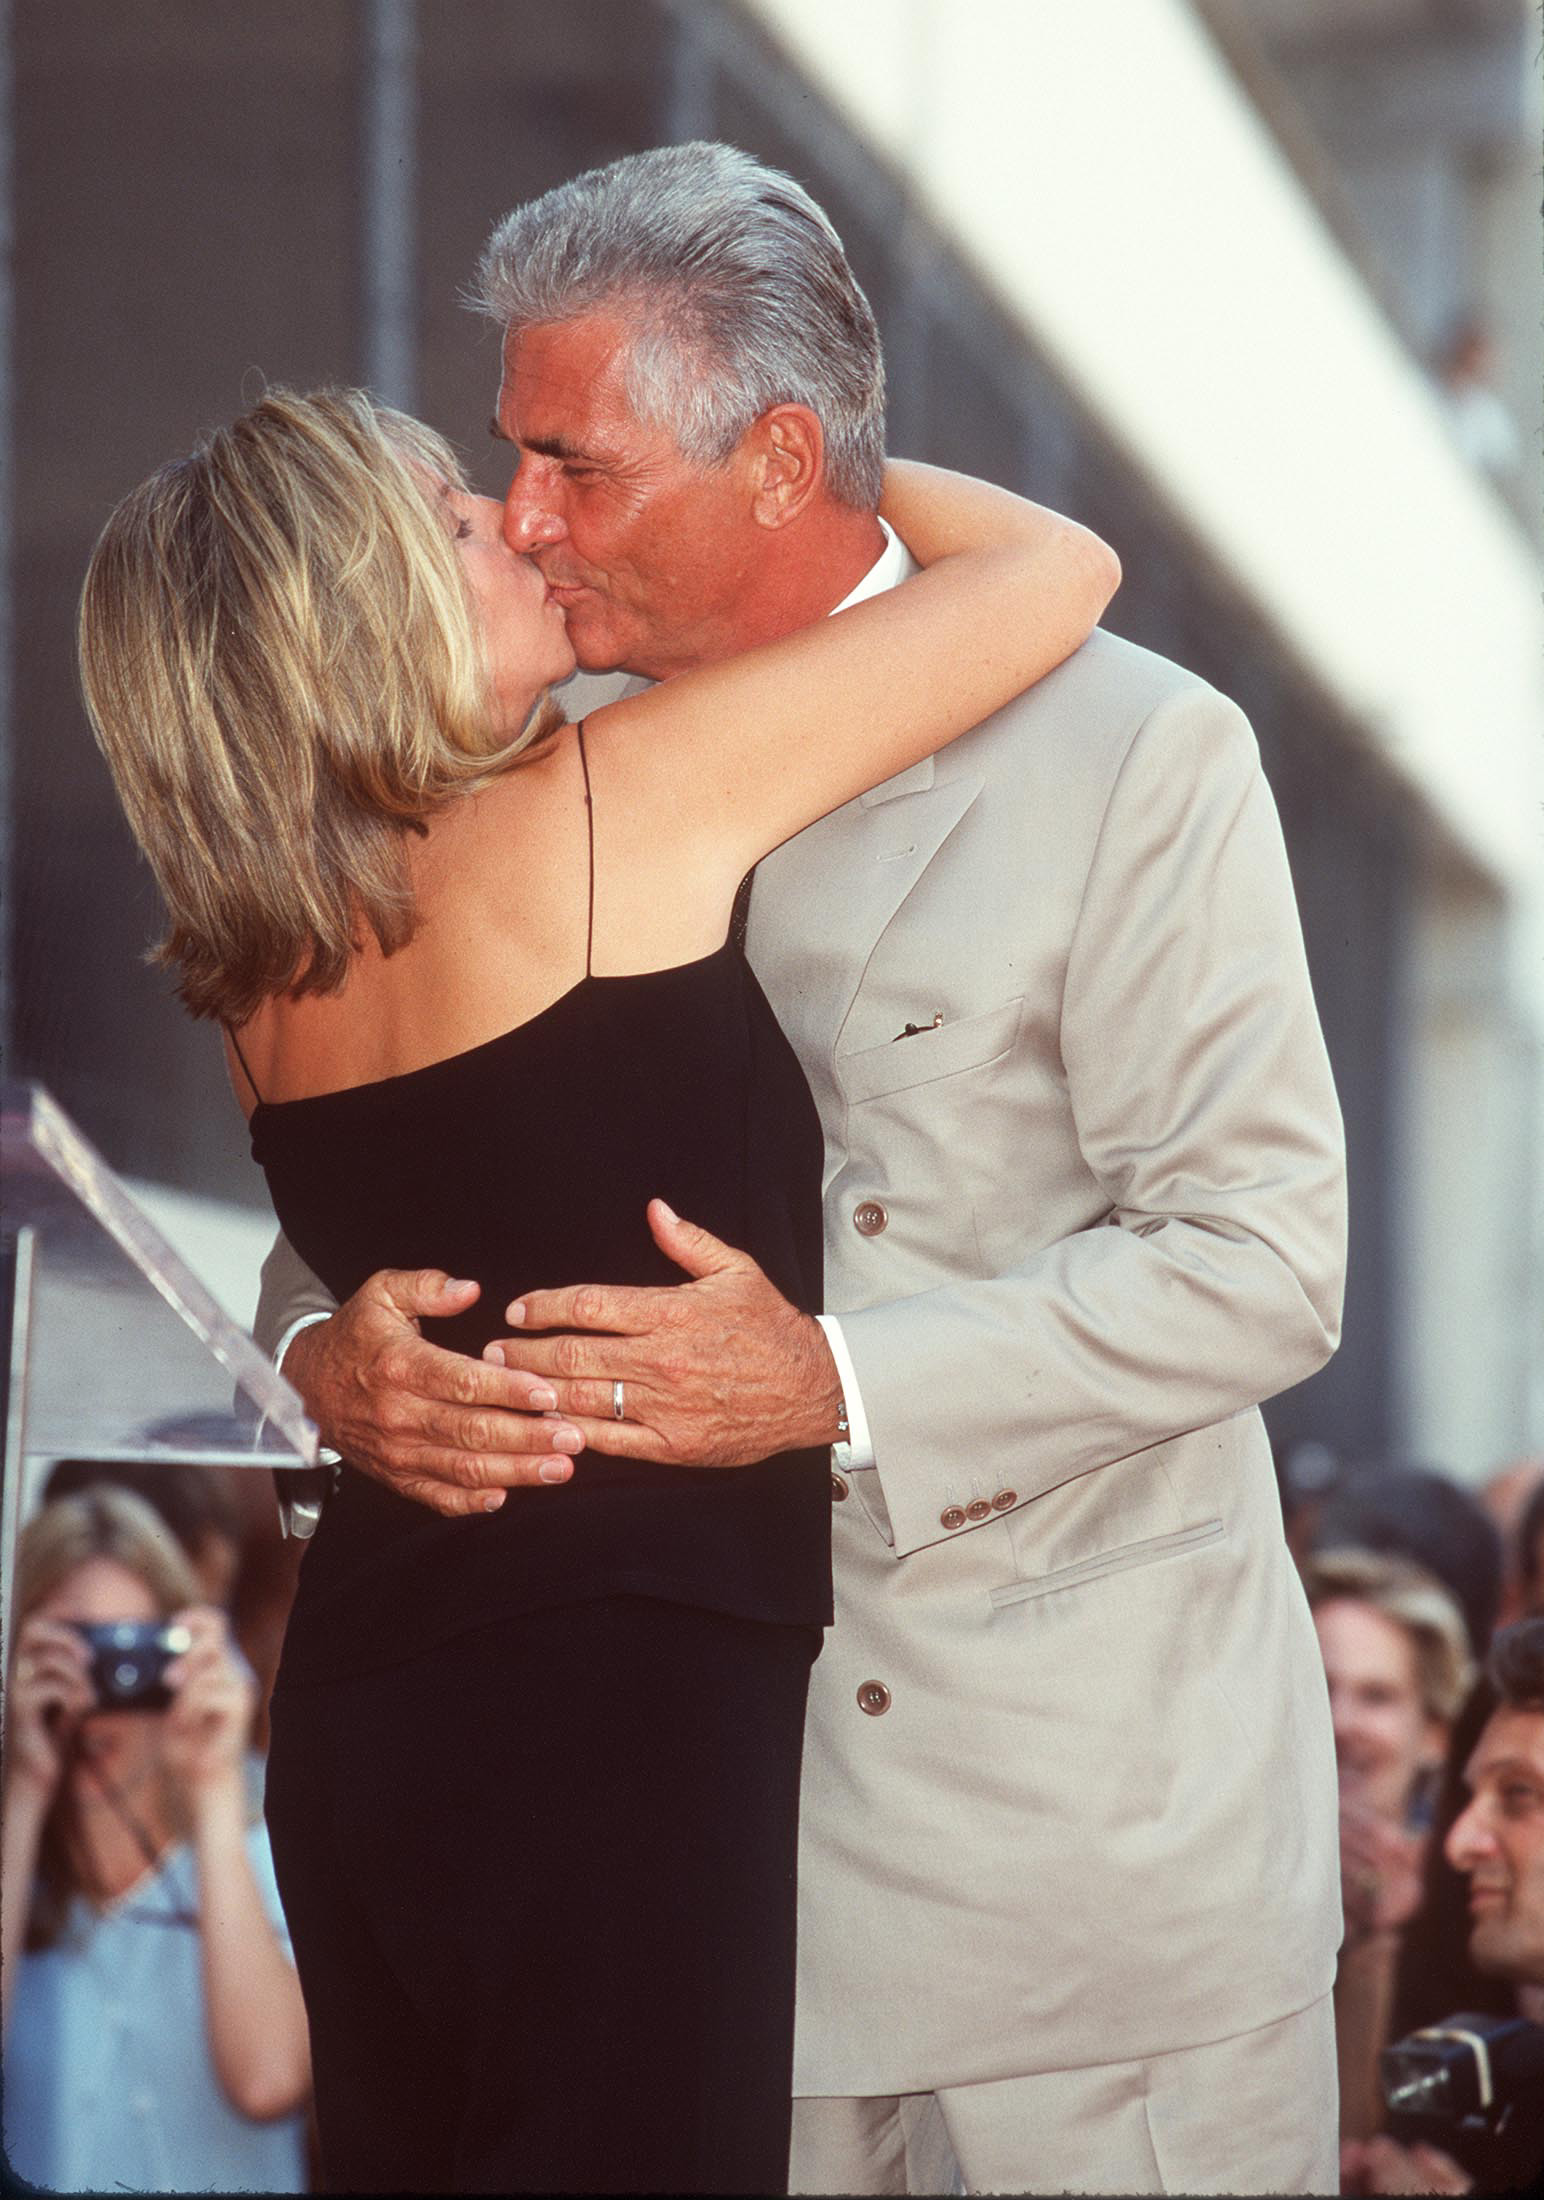 Barbra Streisand and James Brolin at his Hollywood Walk of Fame star ceremony in Hollywood, California in 1998 | Source: Getty Images